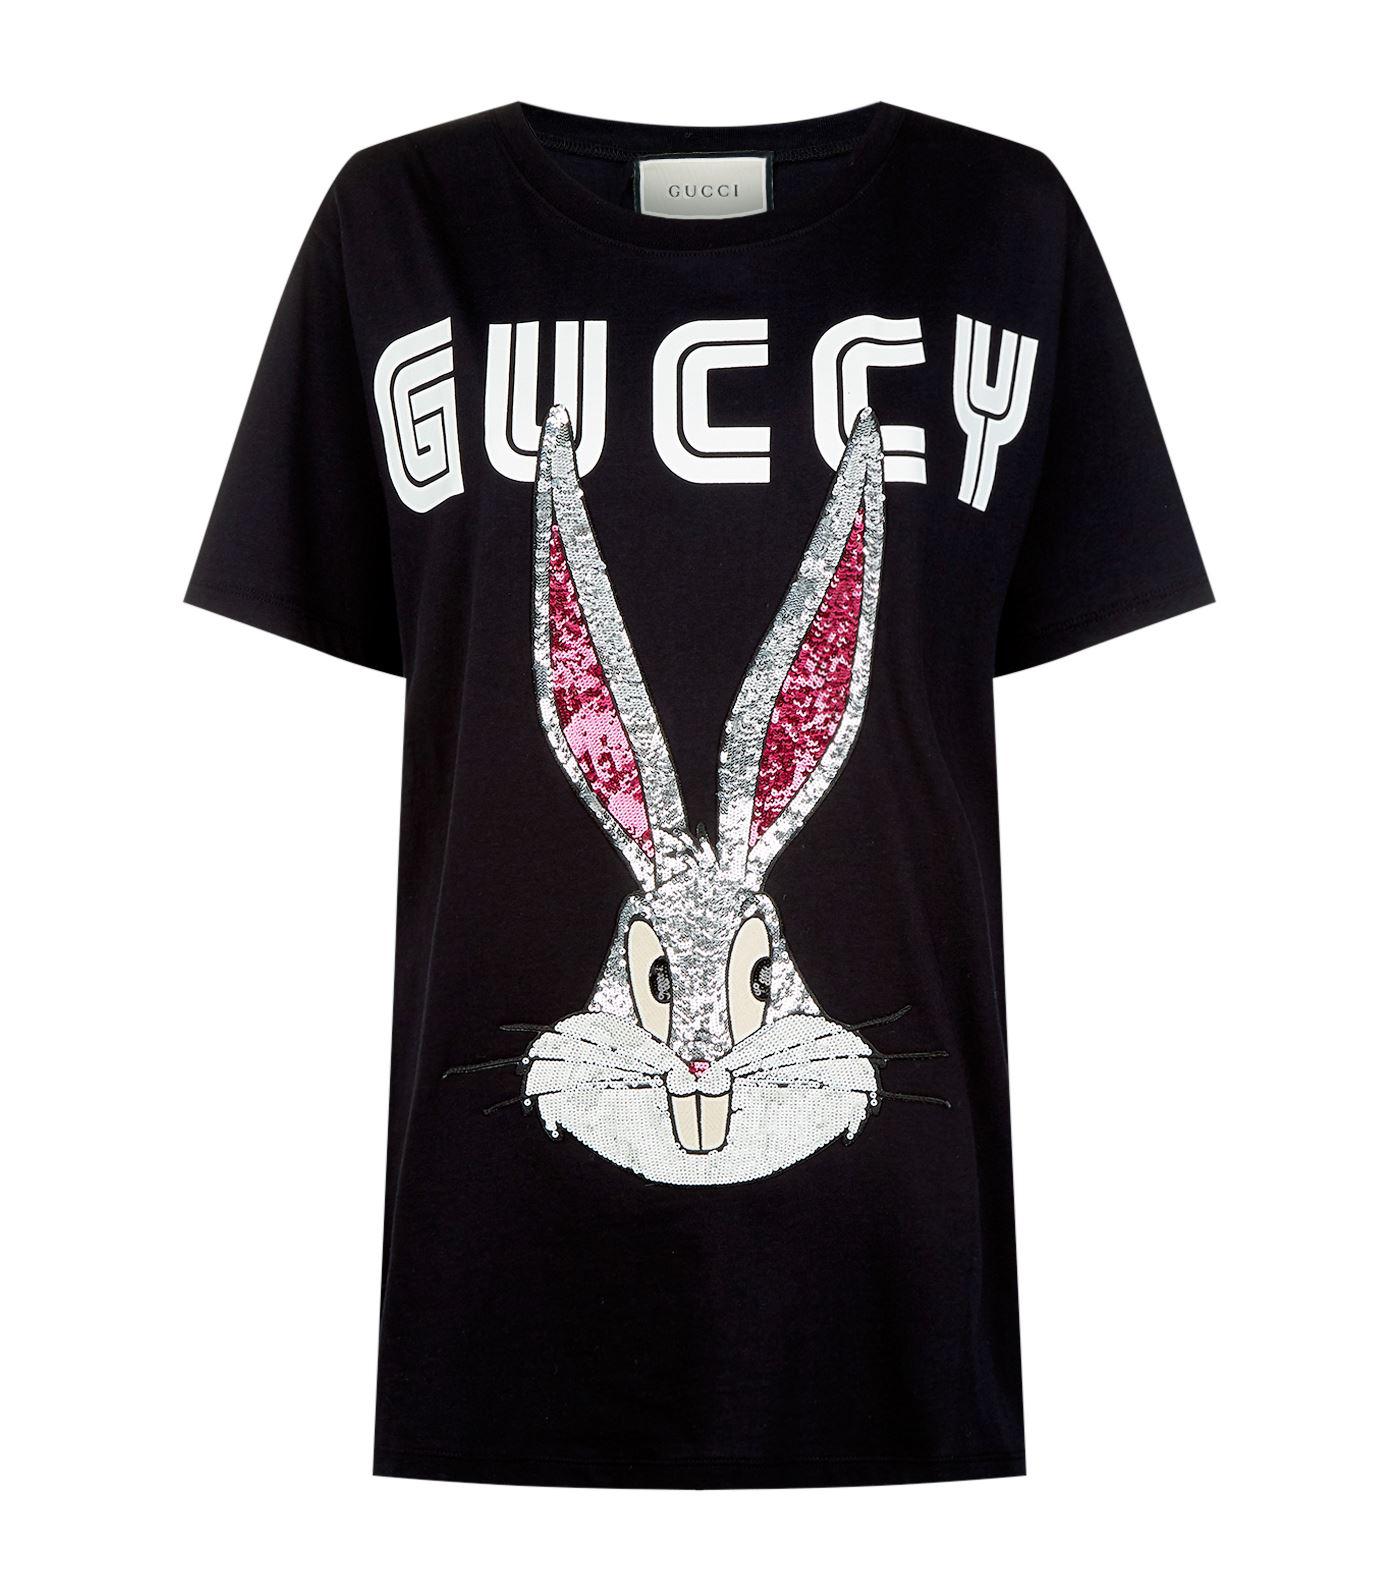 Gucci Bugs Bunny Embellished T-shirt in Black | Lyst